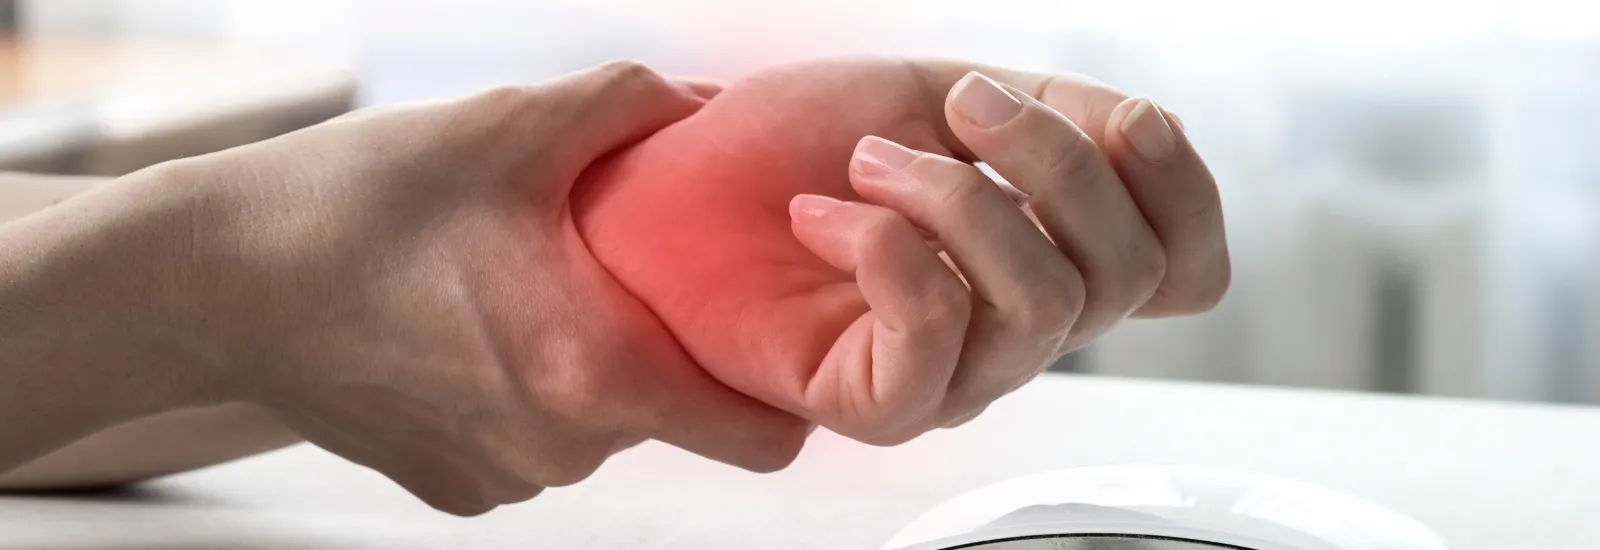 Get relief from carpal tunnel syndrome pain